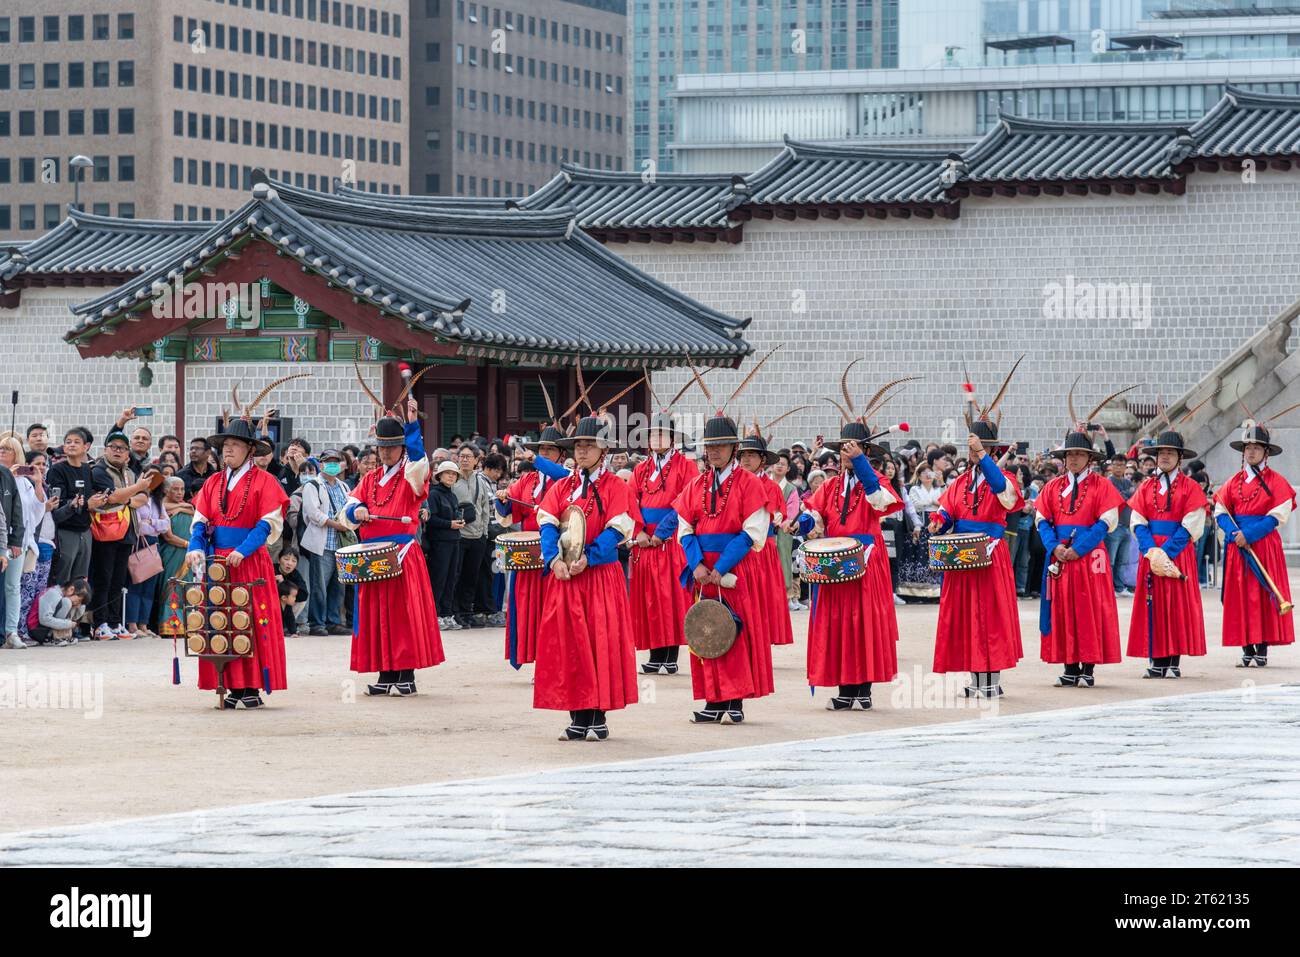 Reenactment of change of Korean royal guards ceremony in historical Joseon costumes in Gyeongbokgung palace in Seoul, capital of South Korea on 4 Nove Stock Photo